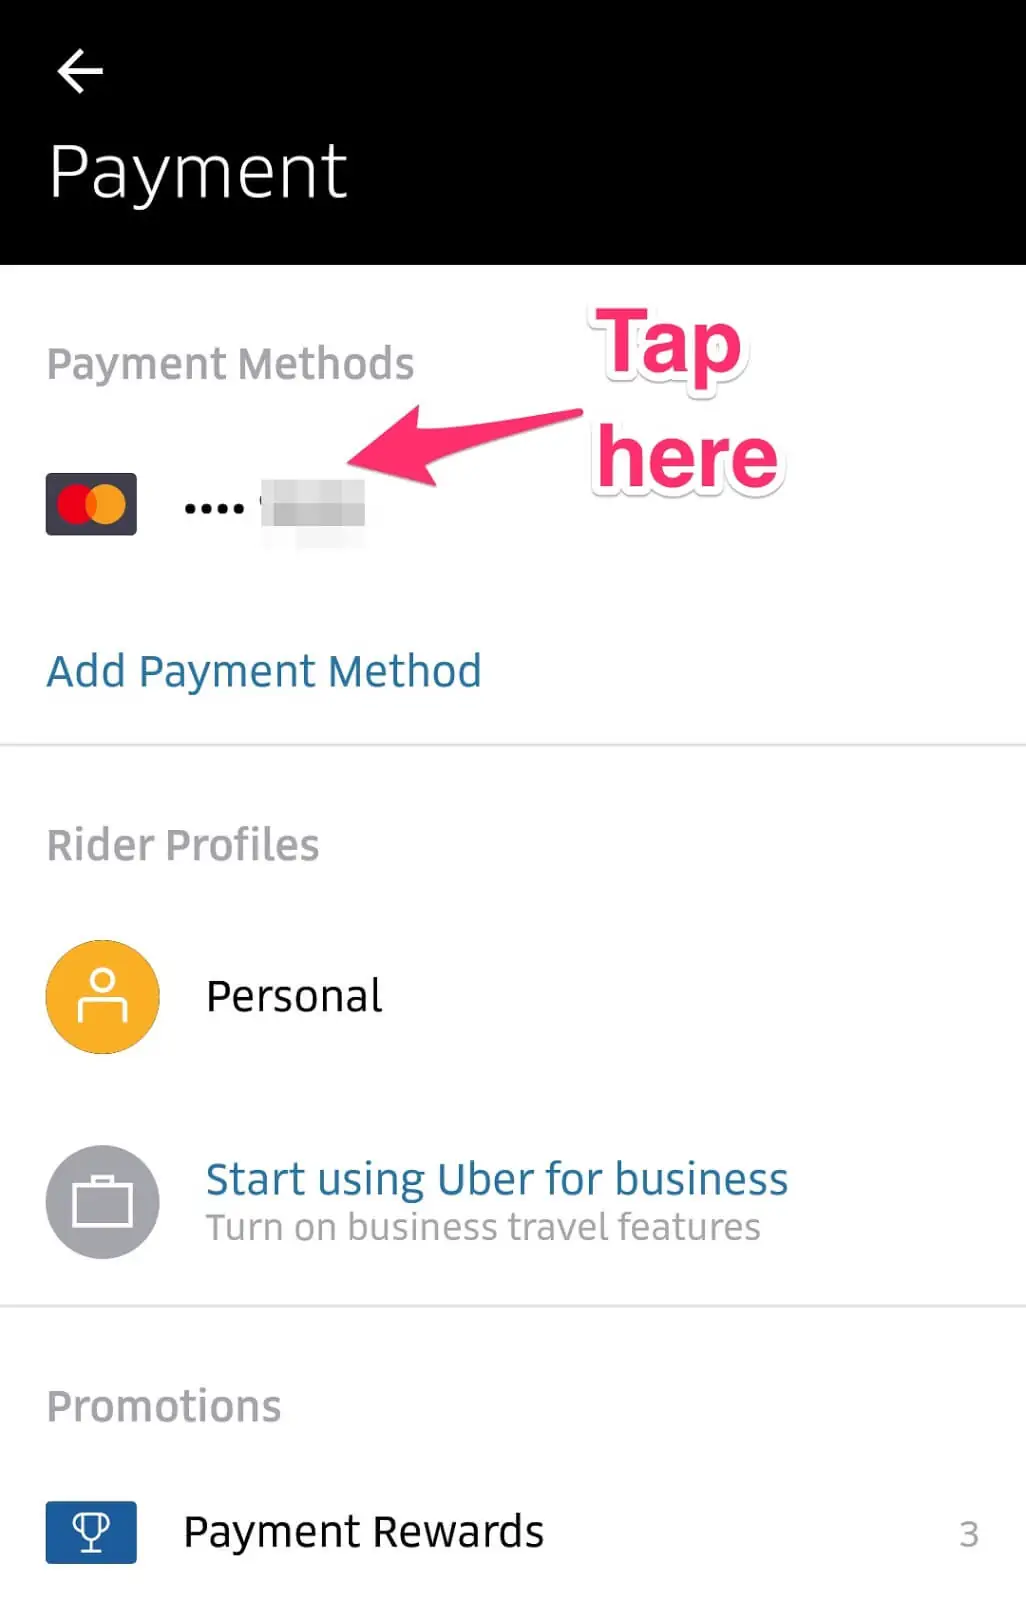 How to Remove Your Credit Card from Uber: tap payment method to edit it